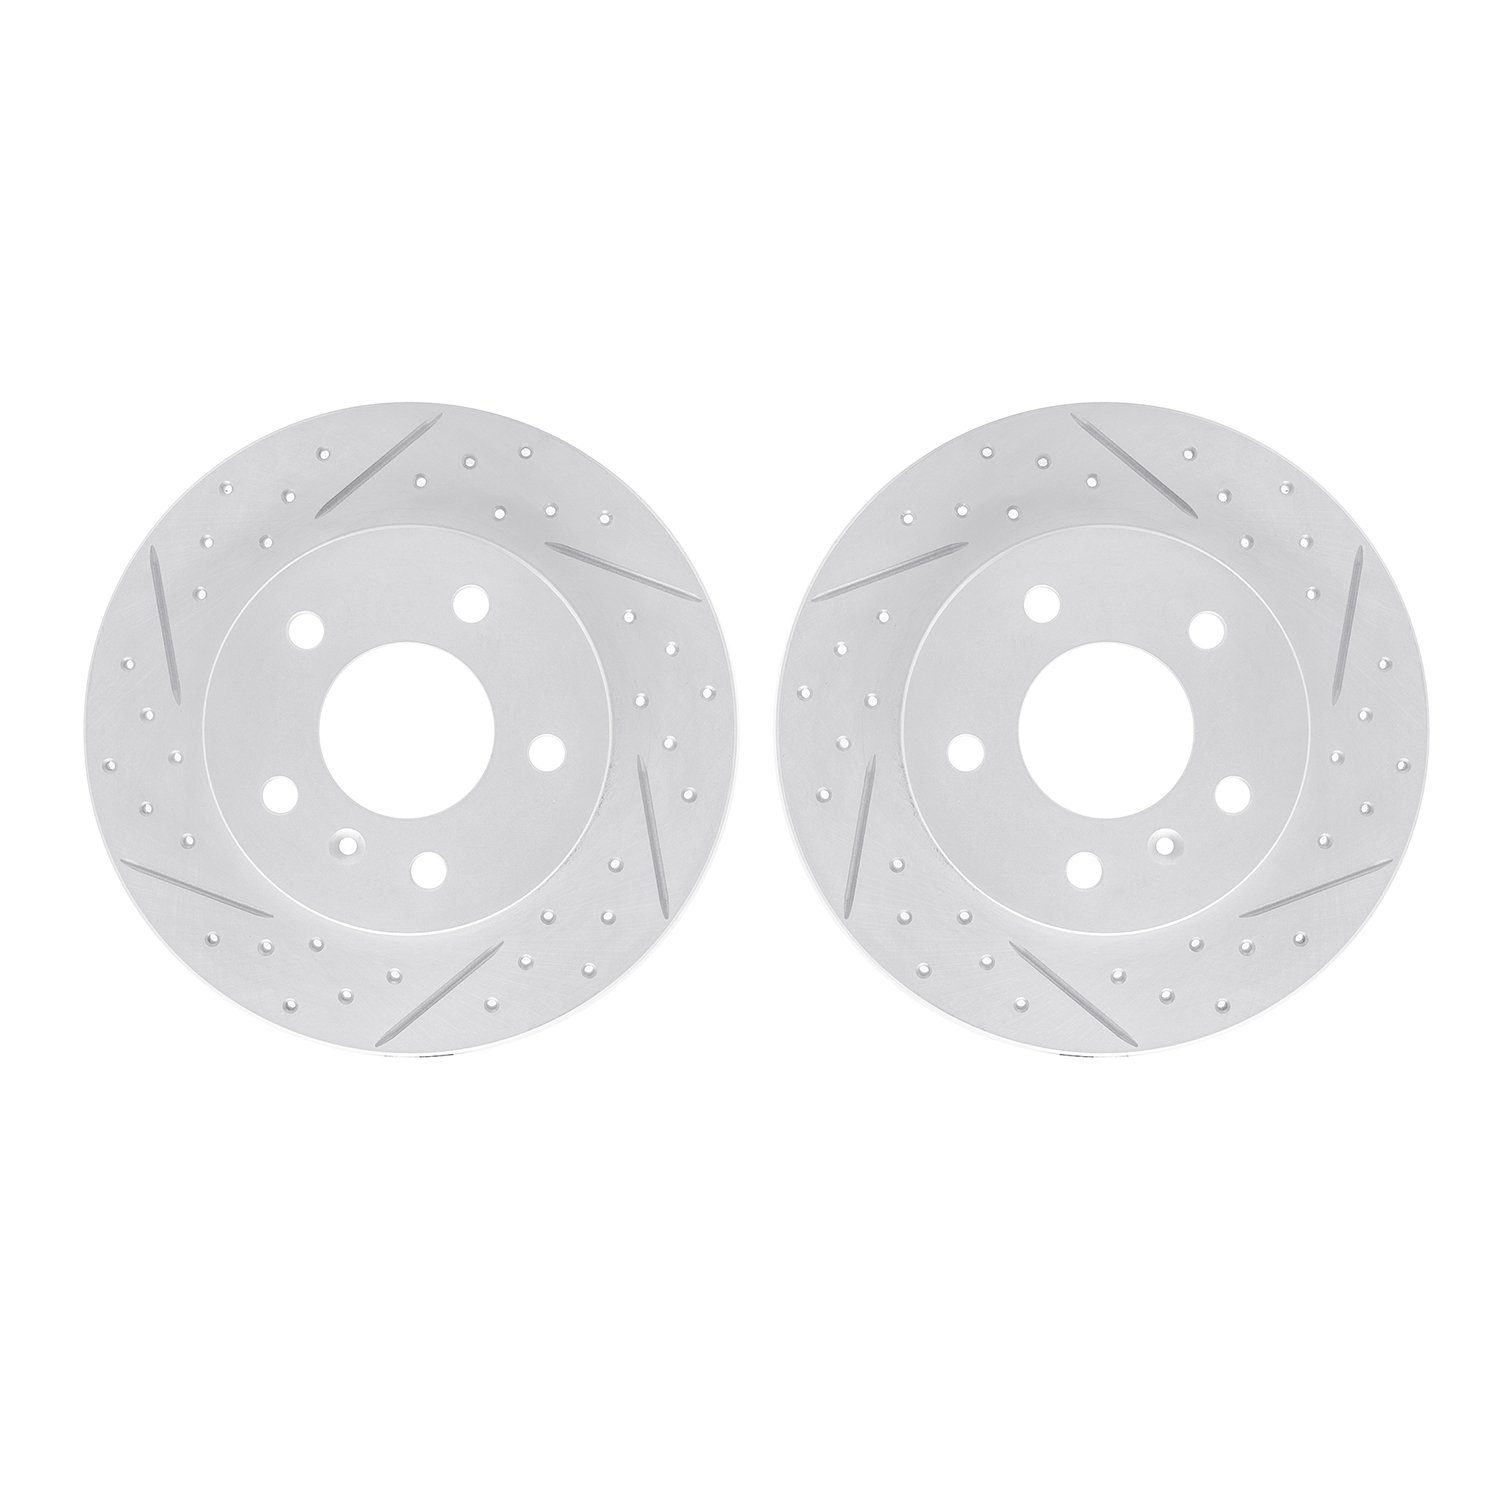 2002-47030 Geoperformance Drilled/Slotted Brake Rotors, 2004-2016 GM, Position: Rear